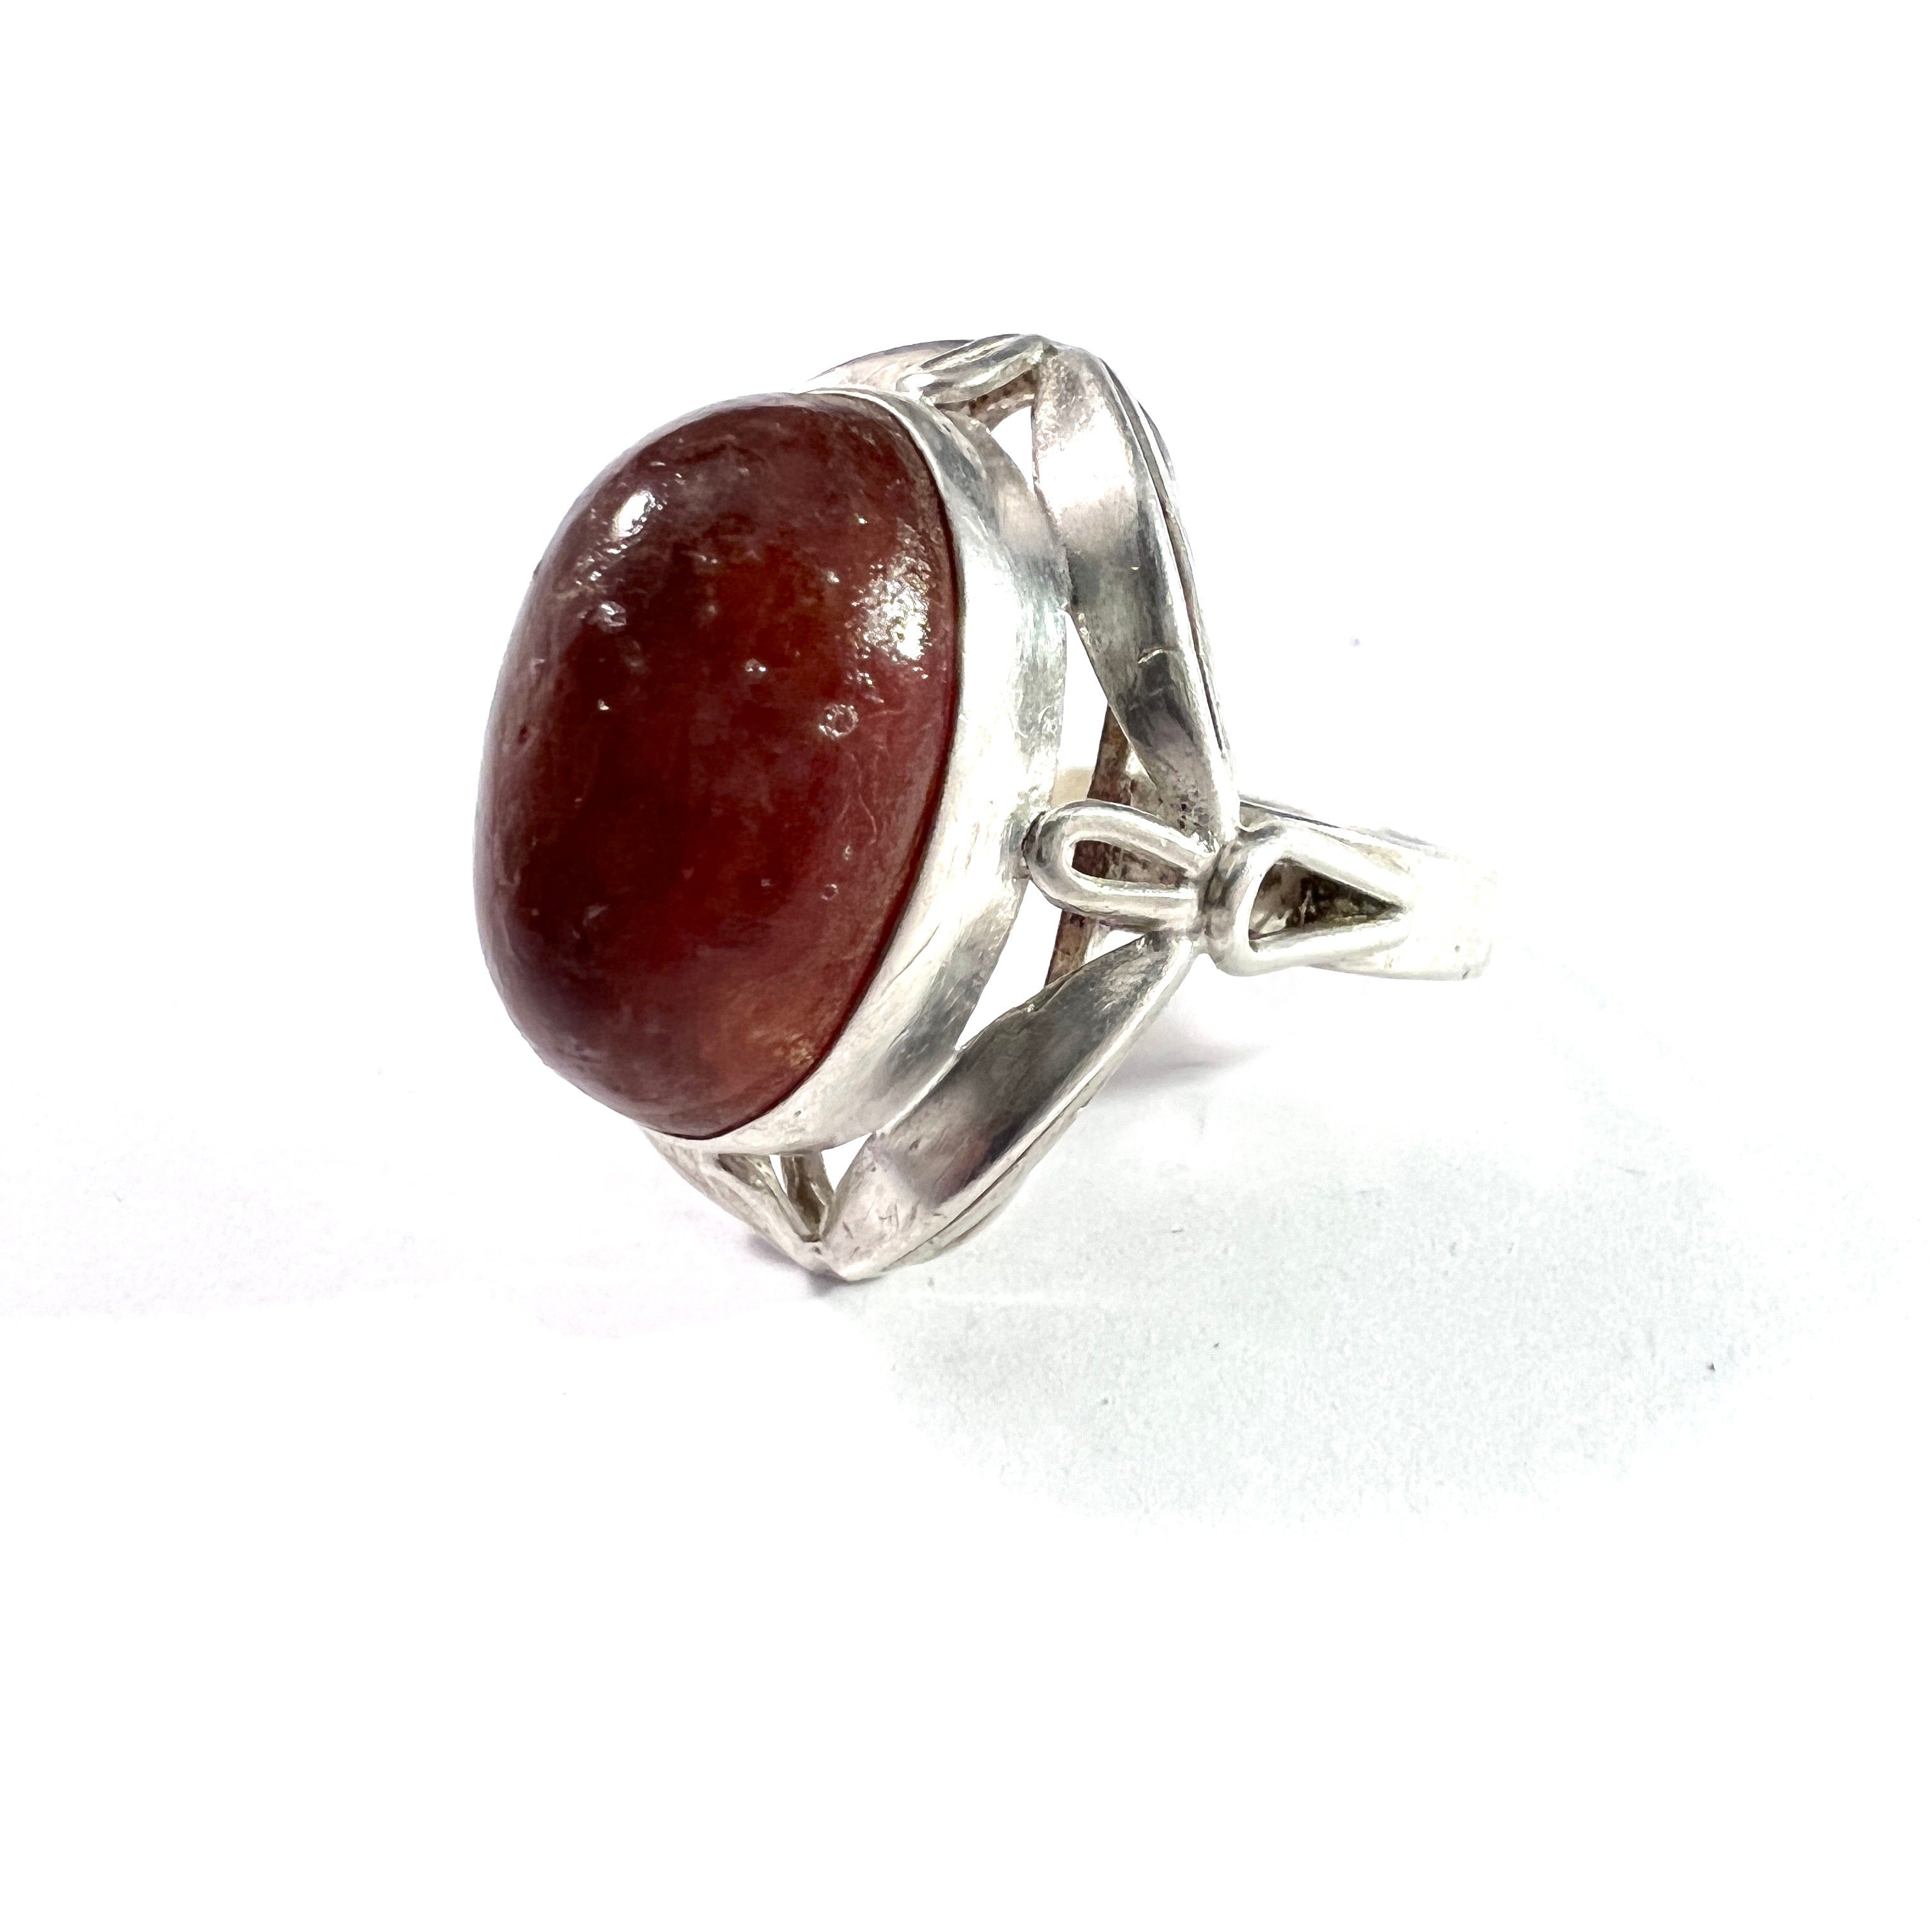 Wire Wrapped Ring Handmade Solid Sterling Silver Wire Wrap Amber Cabochon  Gemstone Statement Ring Great Gift Idea